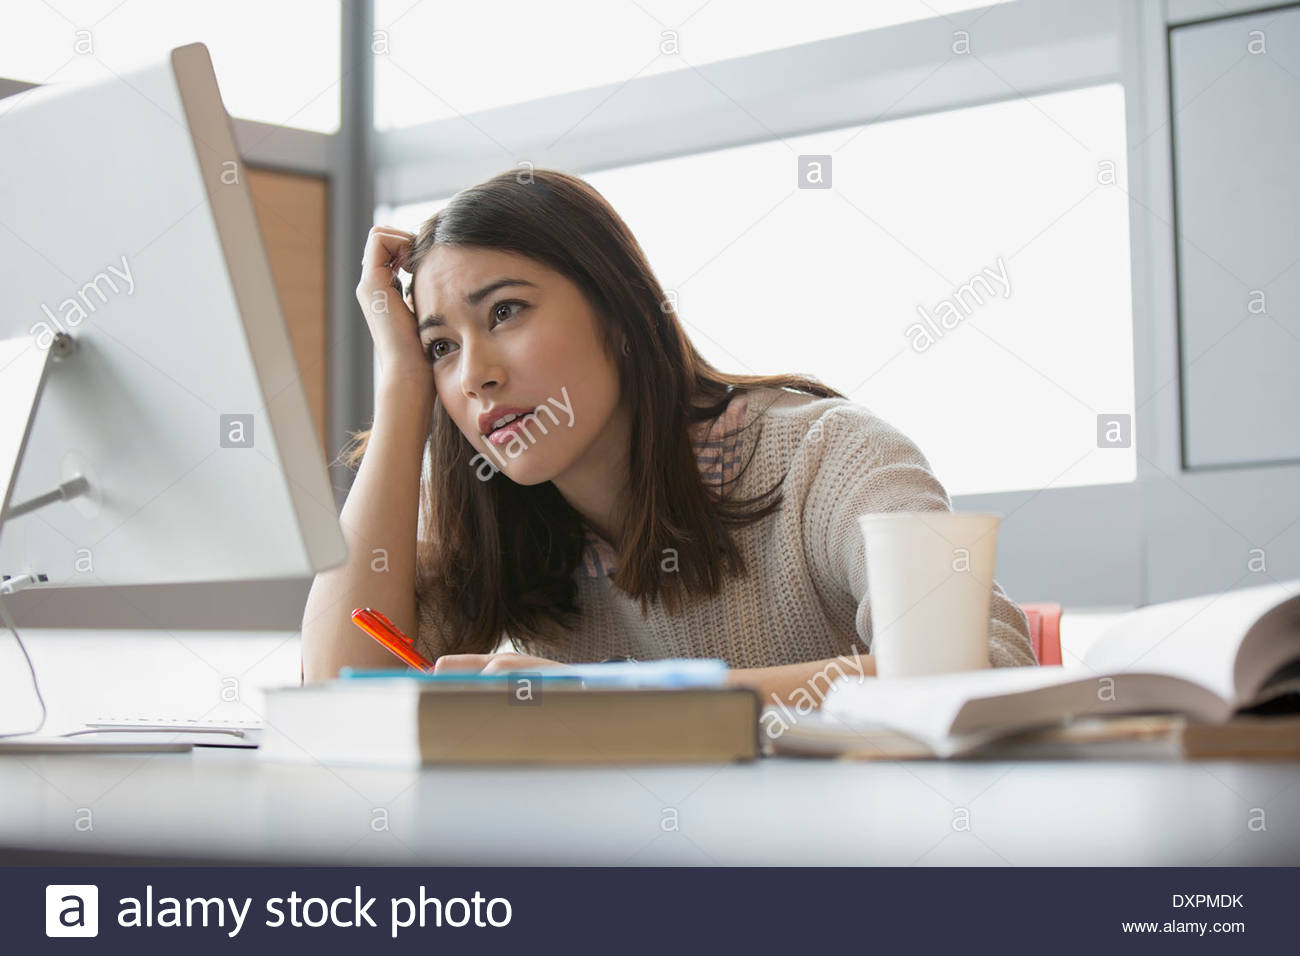 Frustrated college student studying at computer Stock Photo